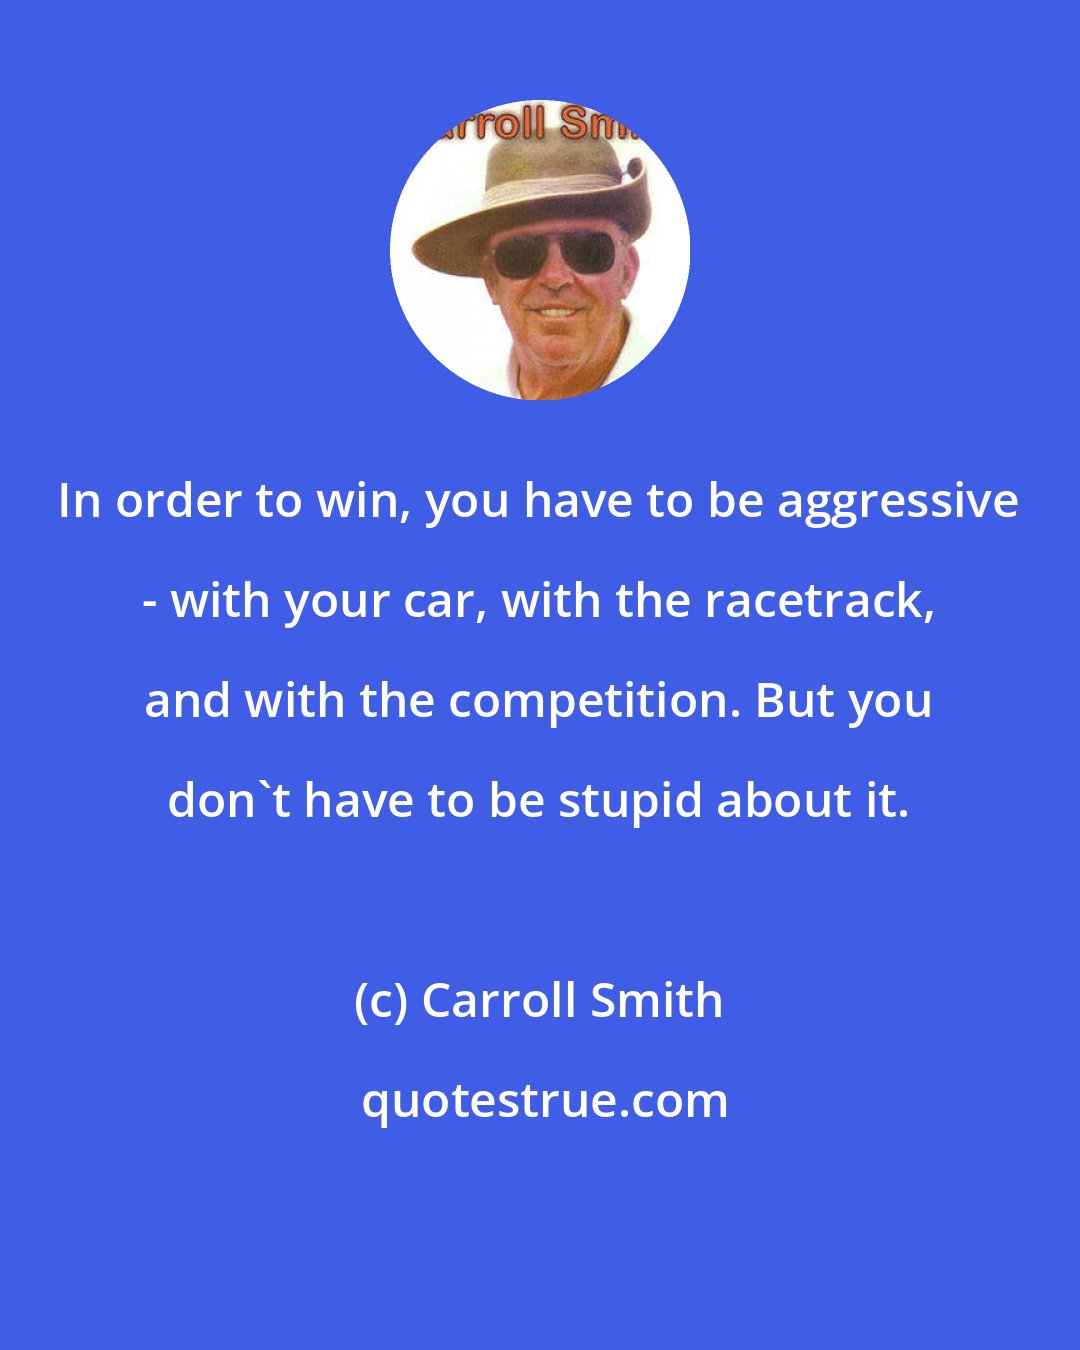 Carroll Smith: In order to win, you have to be aggressive - with your car, with the racetrack, and with the competition. But you don't have to be stupid about it.